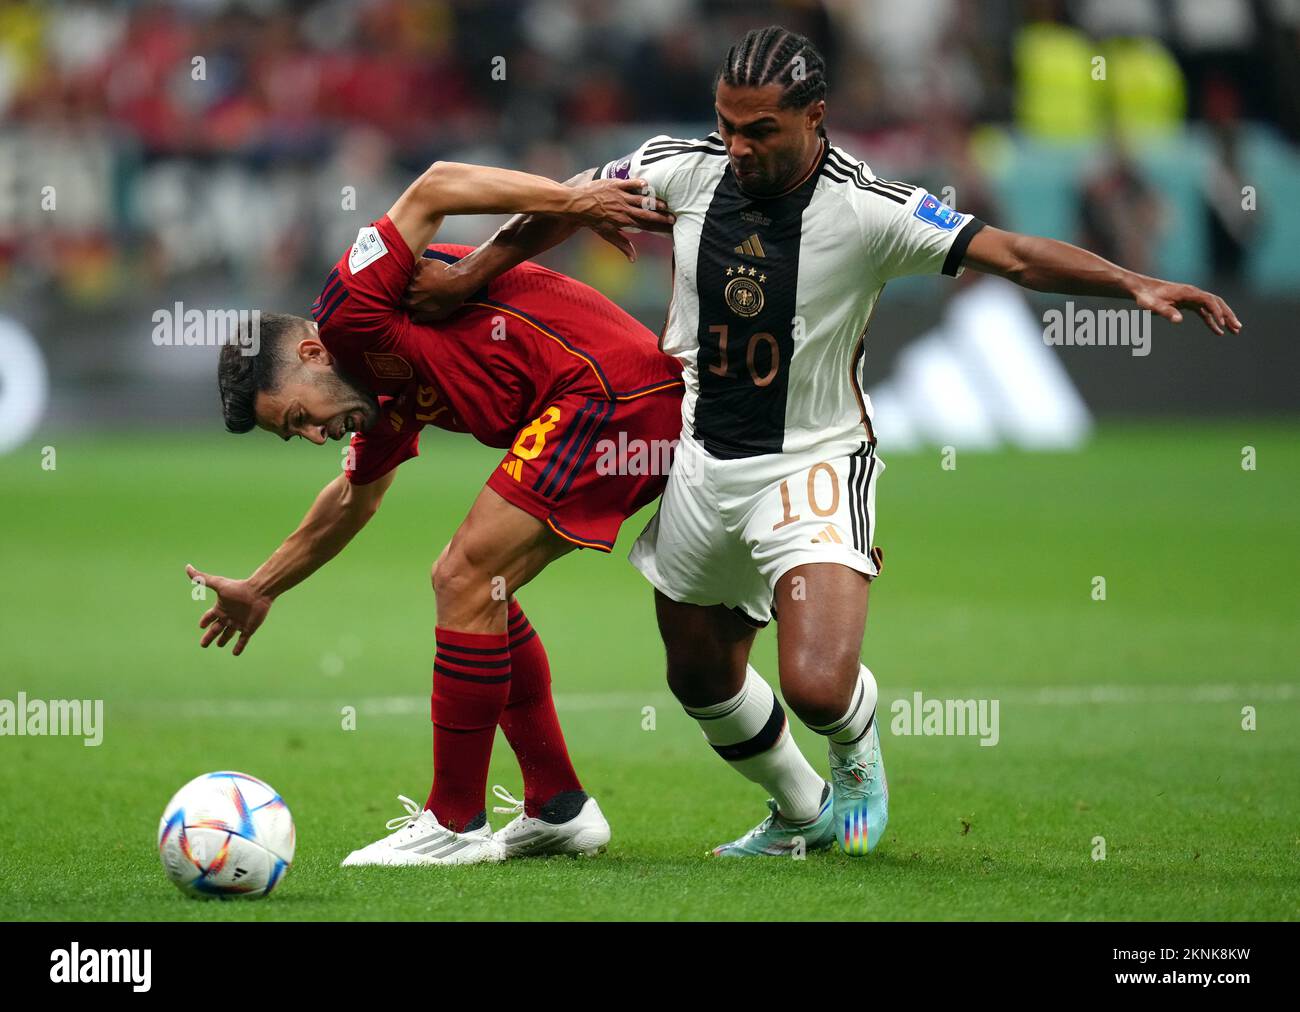 Spain's Jordi Alba (left) and Germany's Serge Gnabry battle for the ball during the FIFA World Cup Group E match at the Al Bayt Stadium, Doha, Qatar. Picture date: Sunday November 27, 2022. Stock Photo